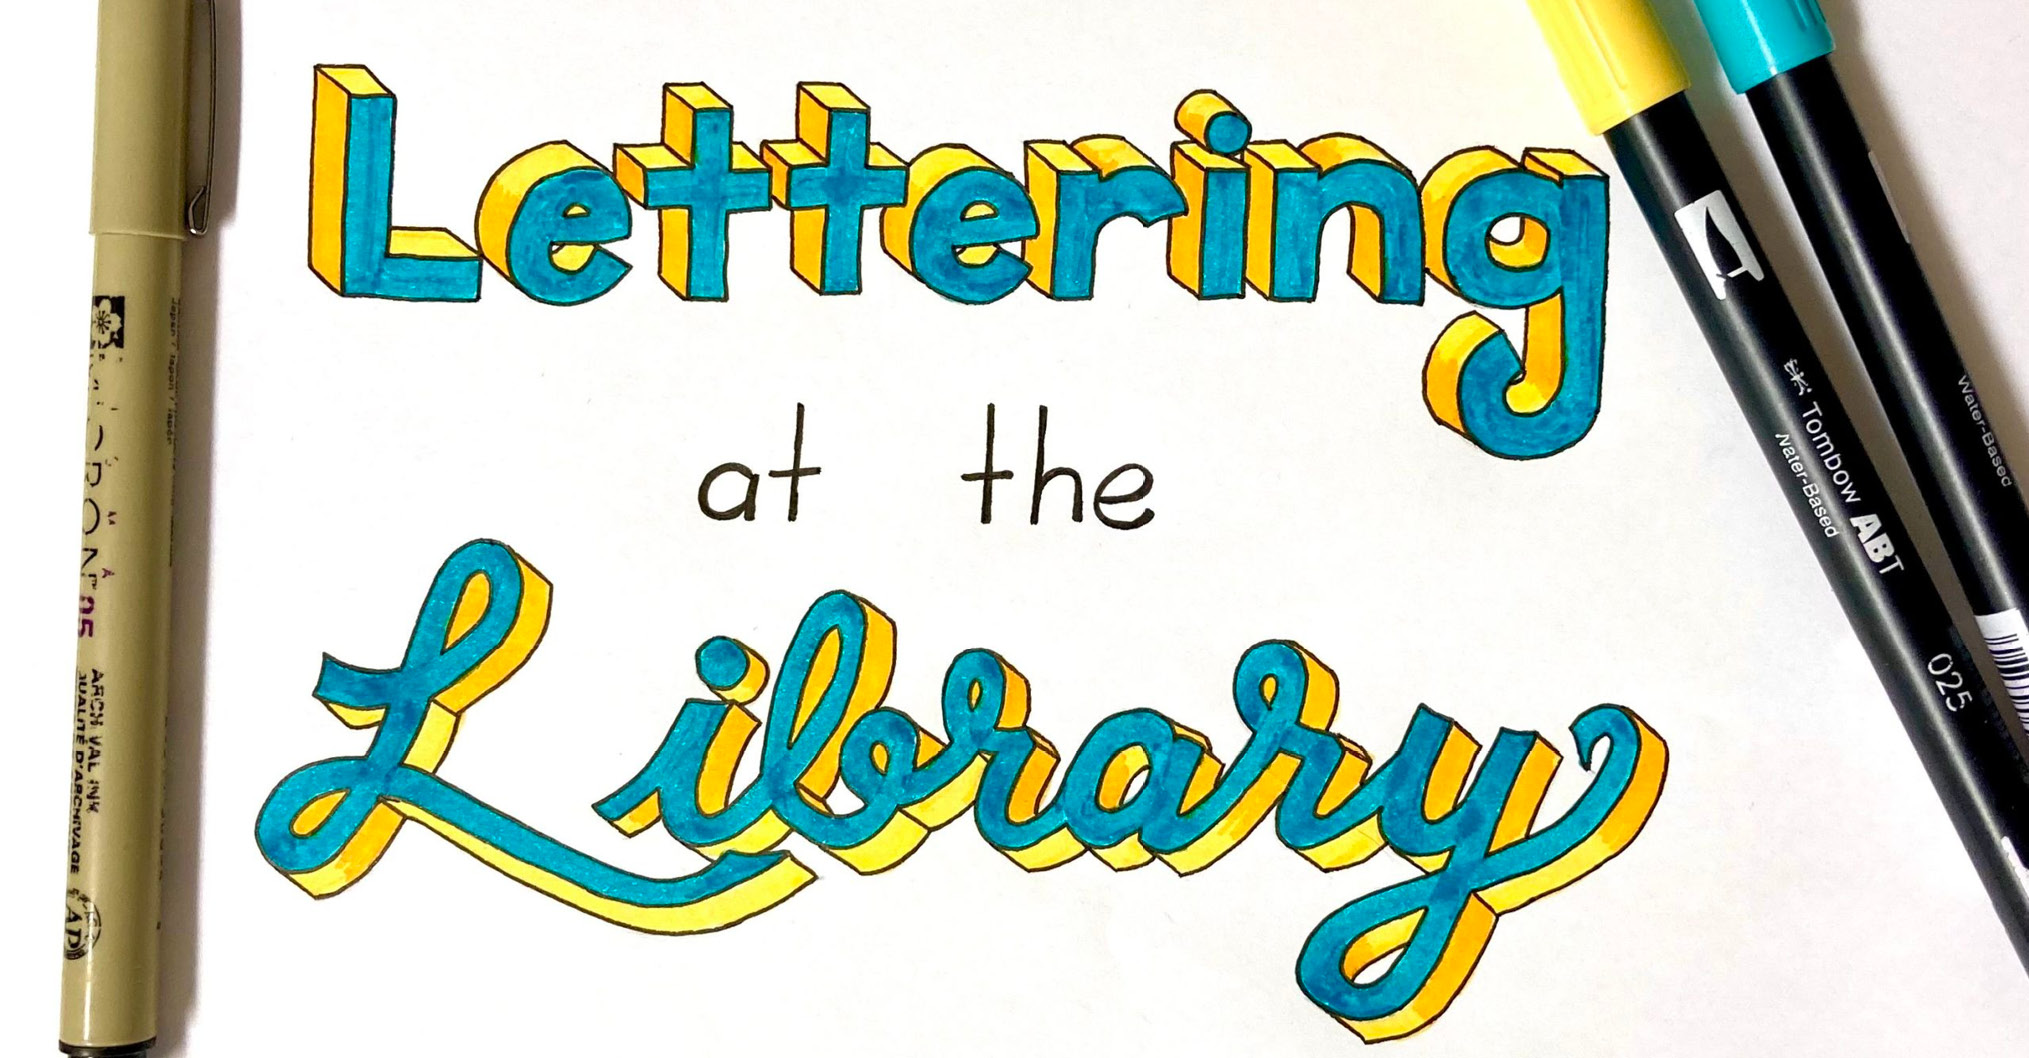 lettering at the lib